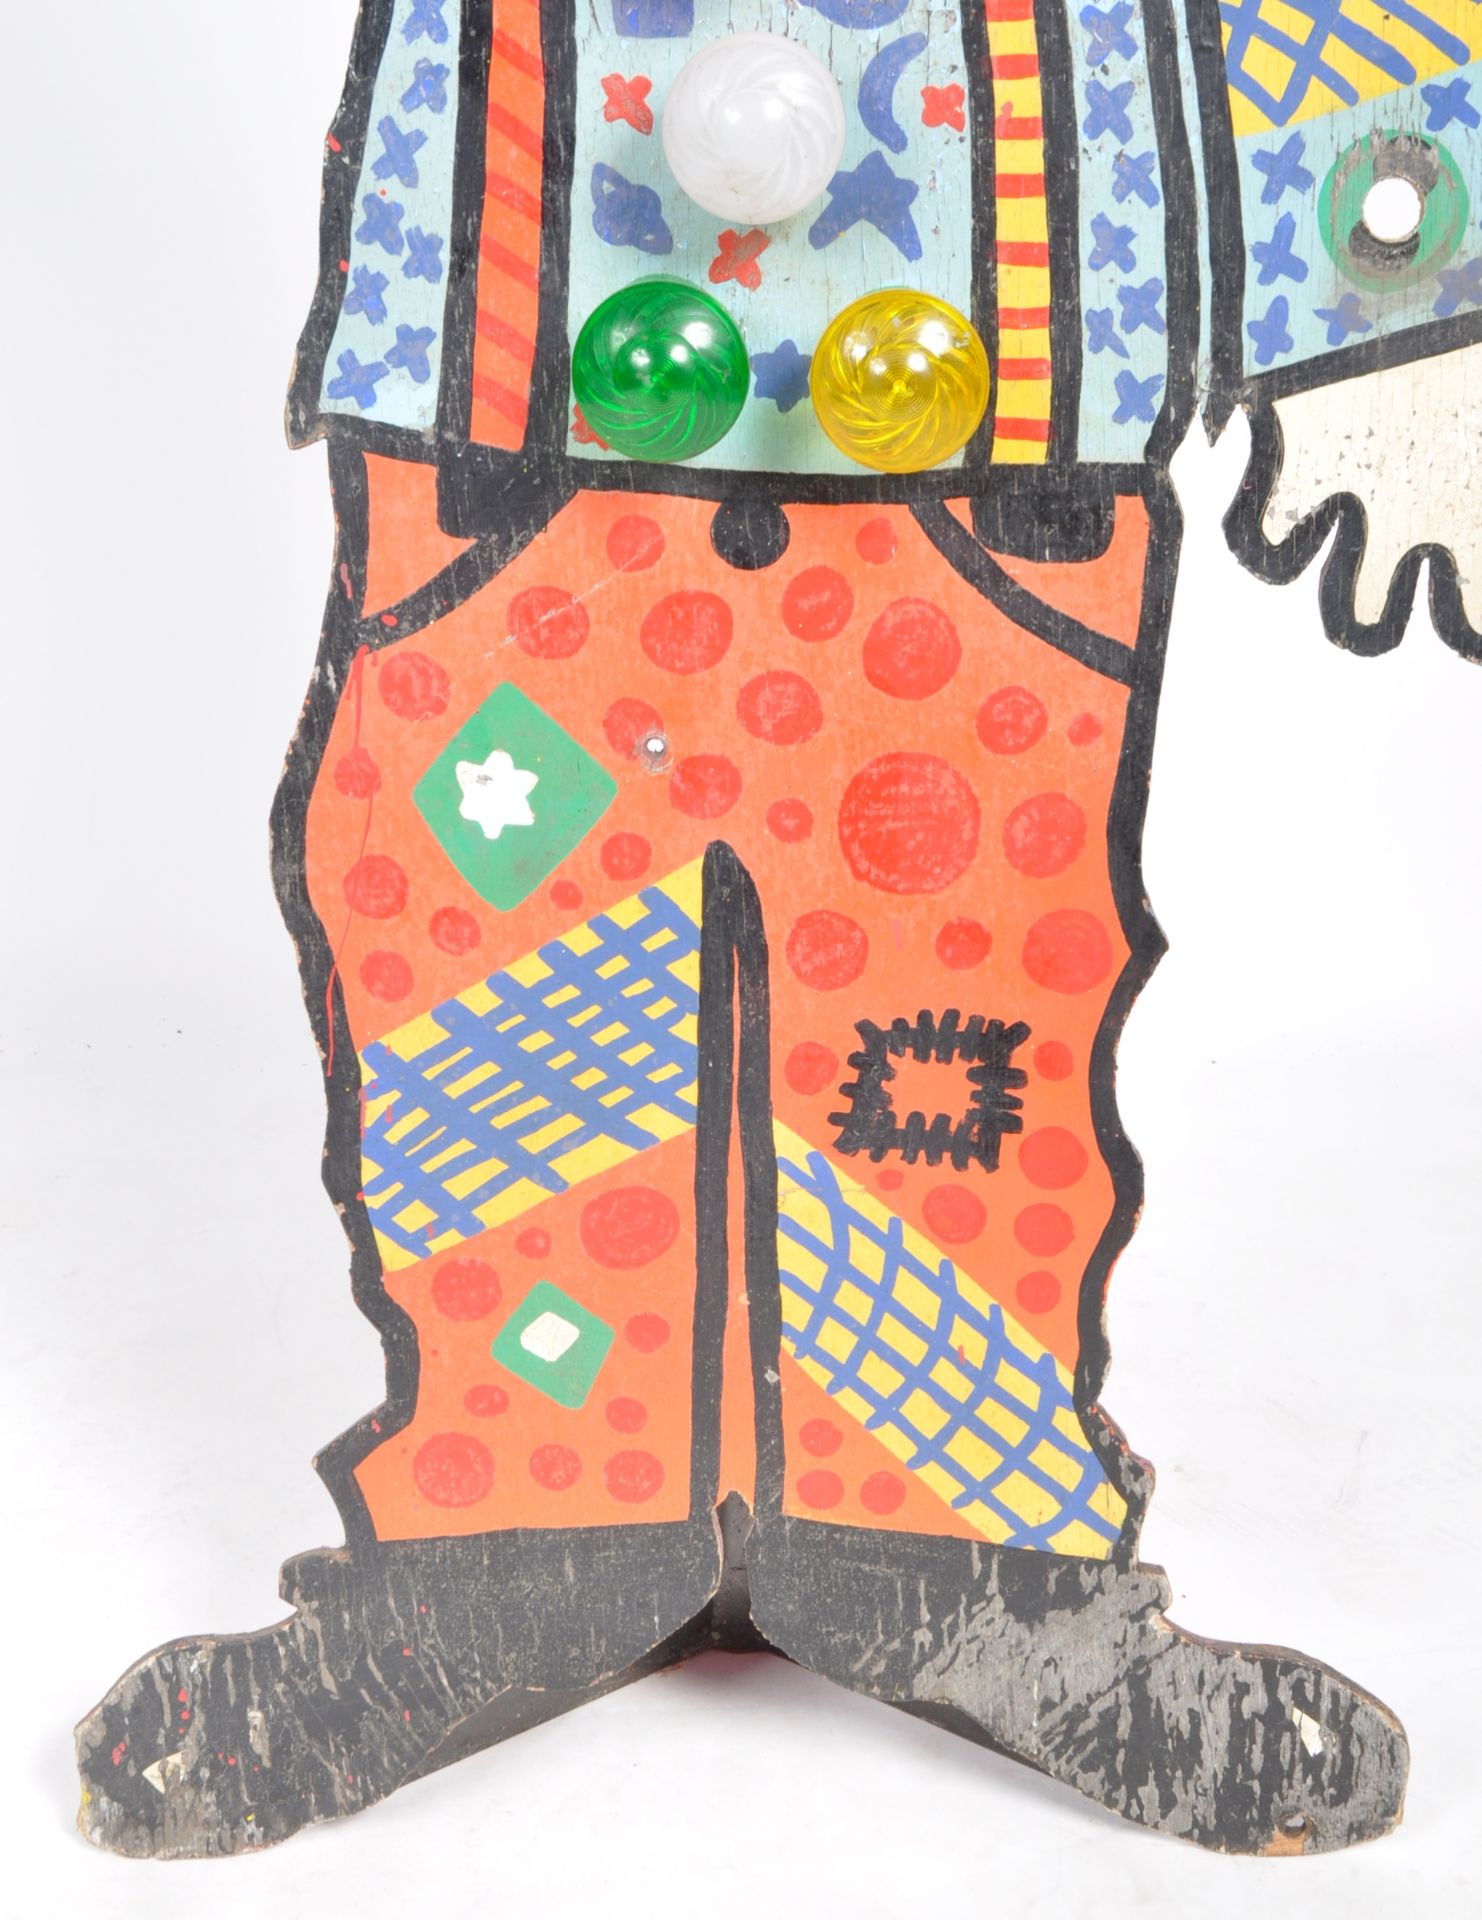 VINTAGE HAND PAINTED FAIRGROUND WOODEN CLOWN DISPLAY - Image 4 of 4